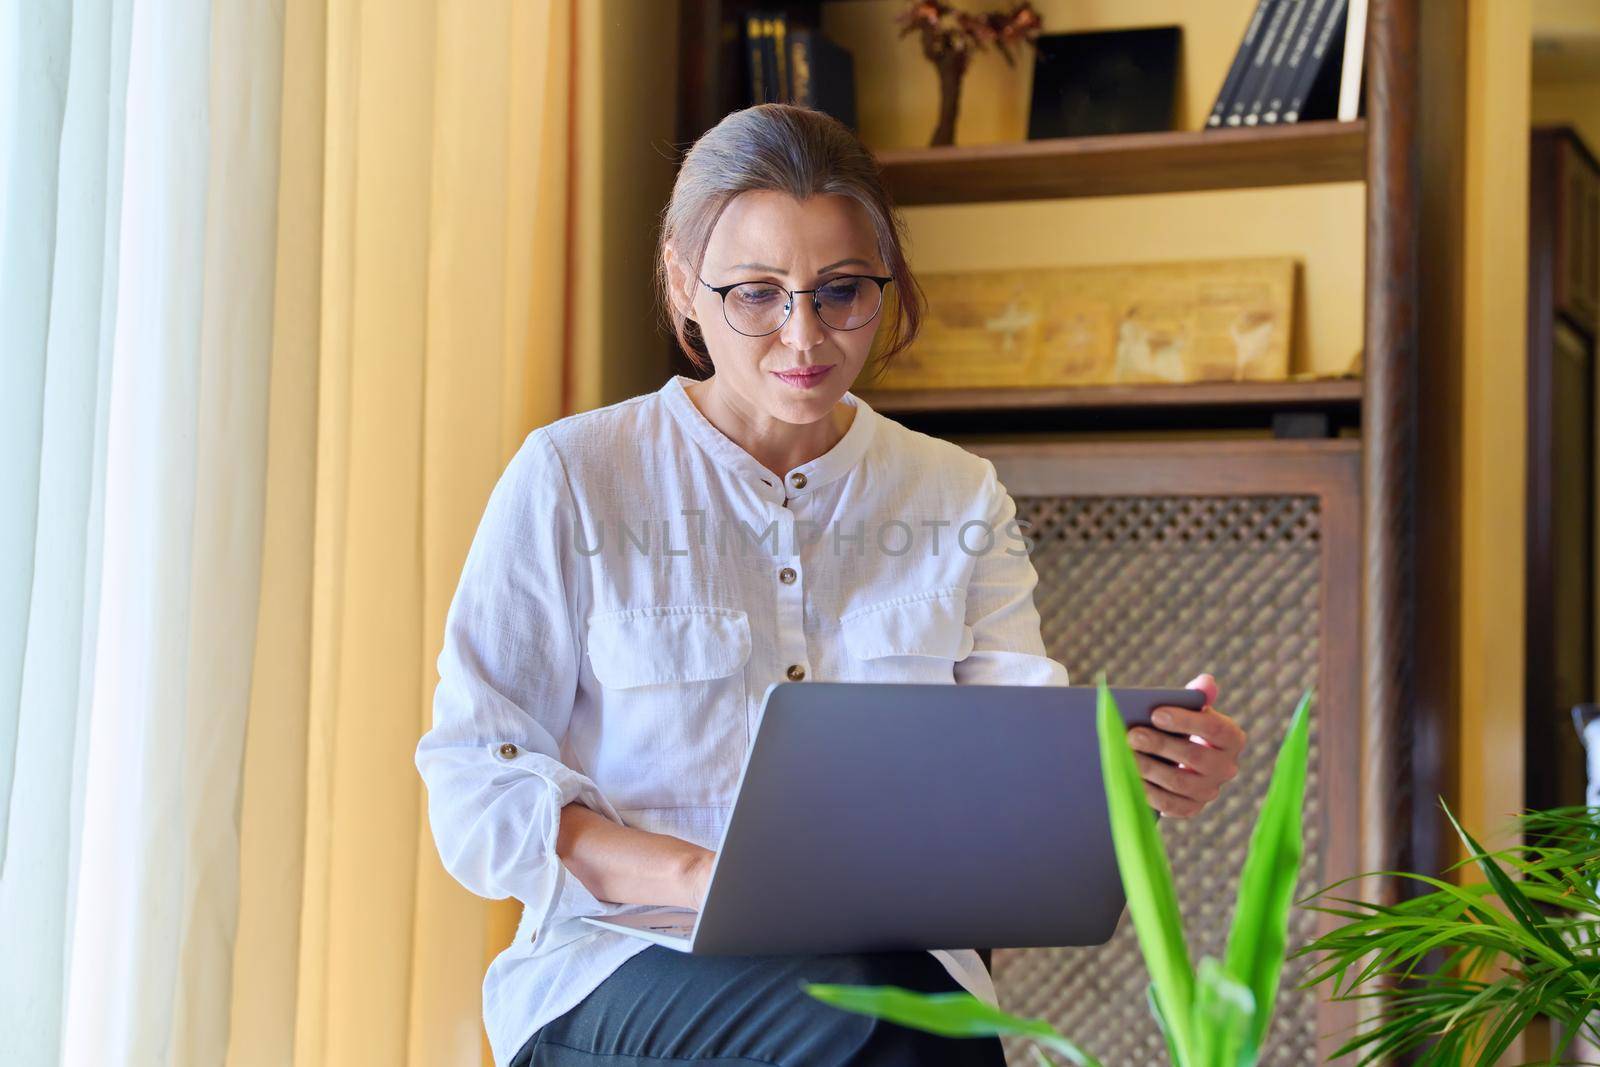 Middle-aged woman psychologist in an office with laptop. Portrait of professional female counselor, psychiatrist, therapist, teacher sitting on chair near window. Technology, medicine, people